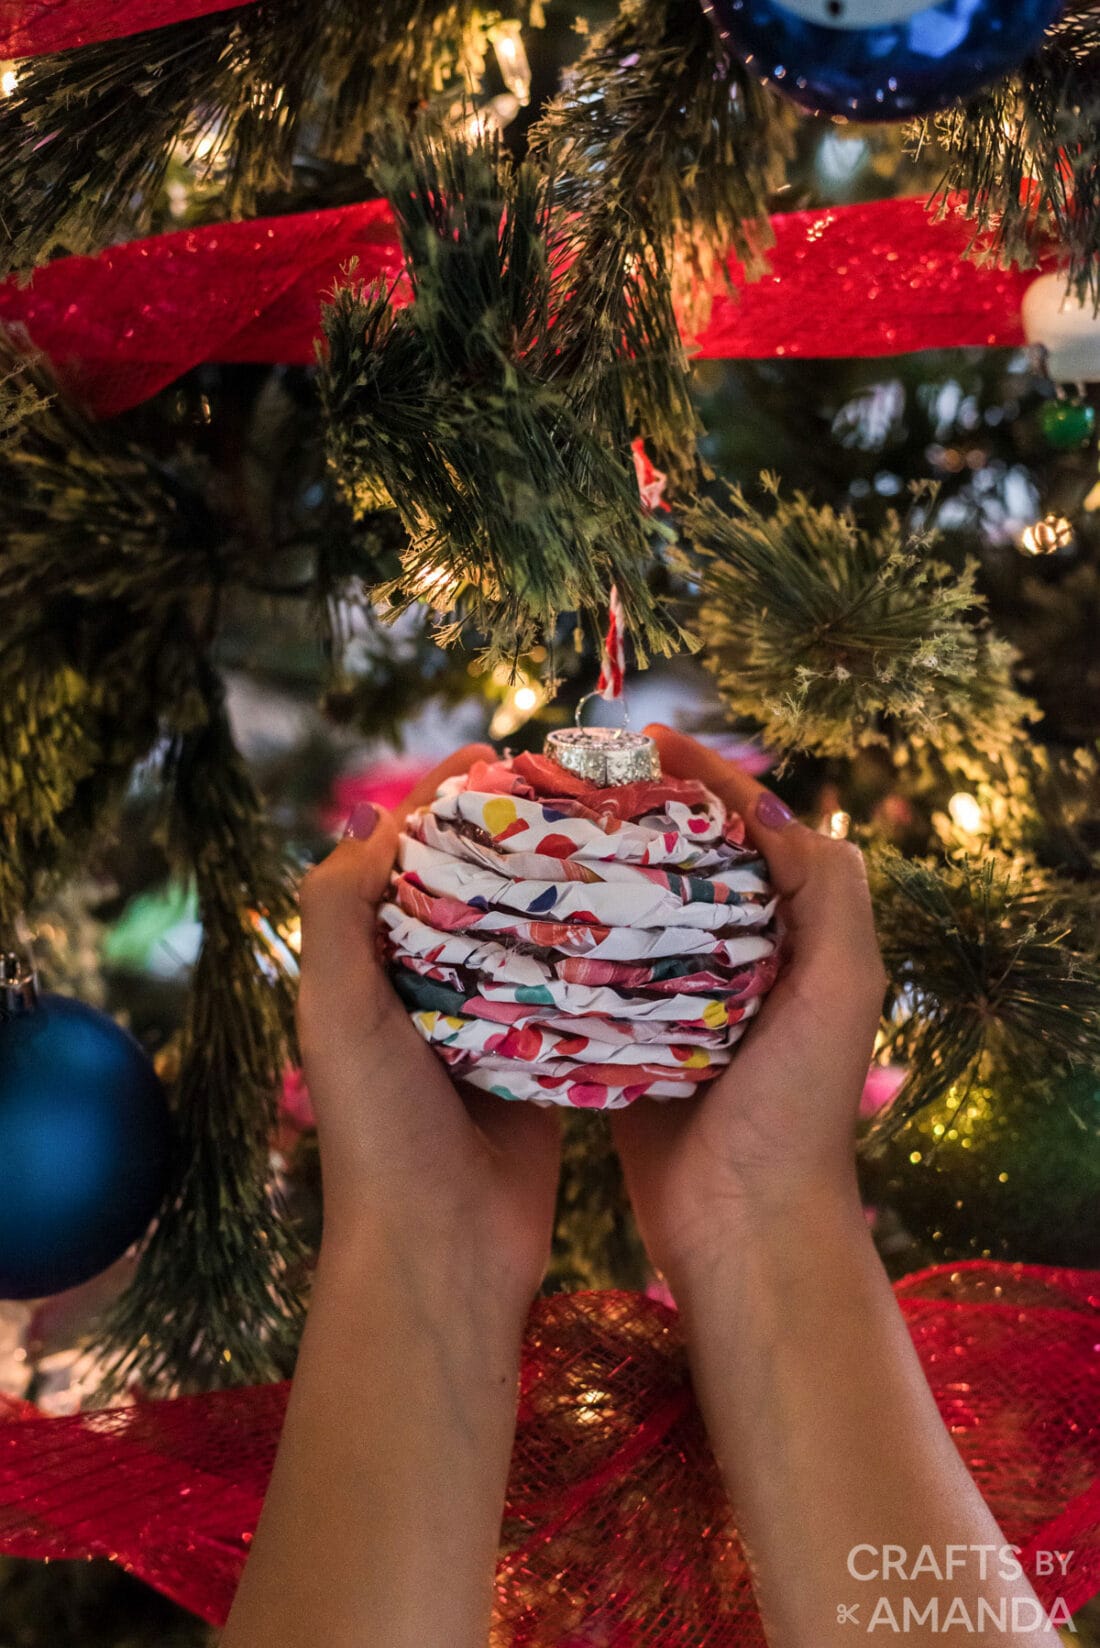 christmas ornament in a child's hands